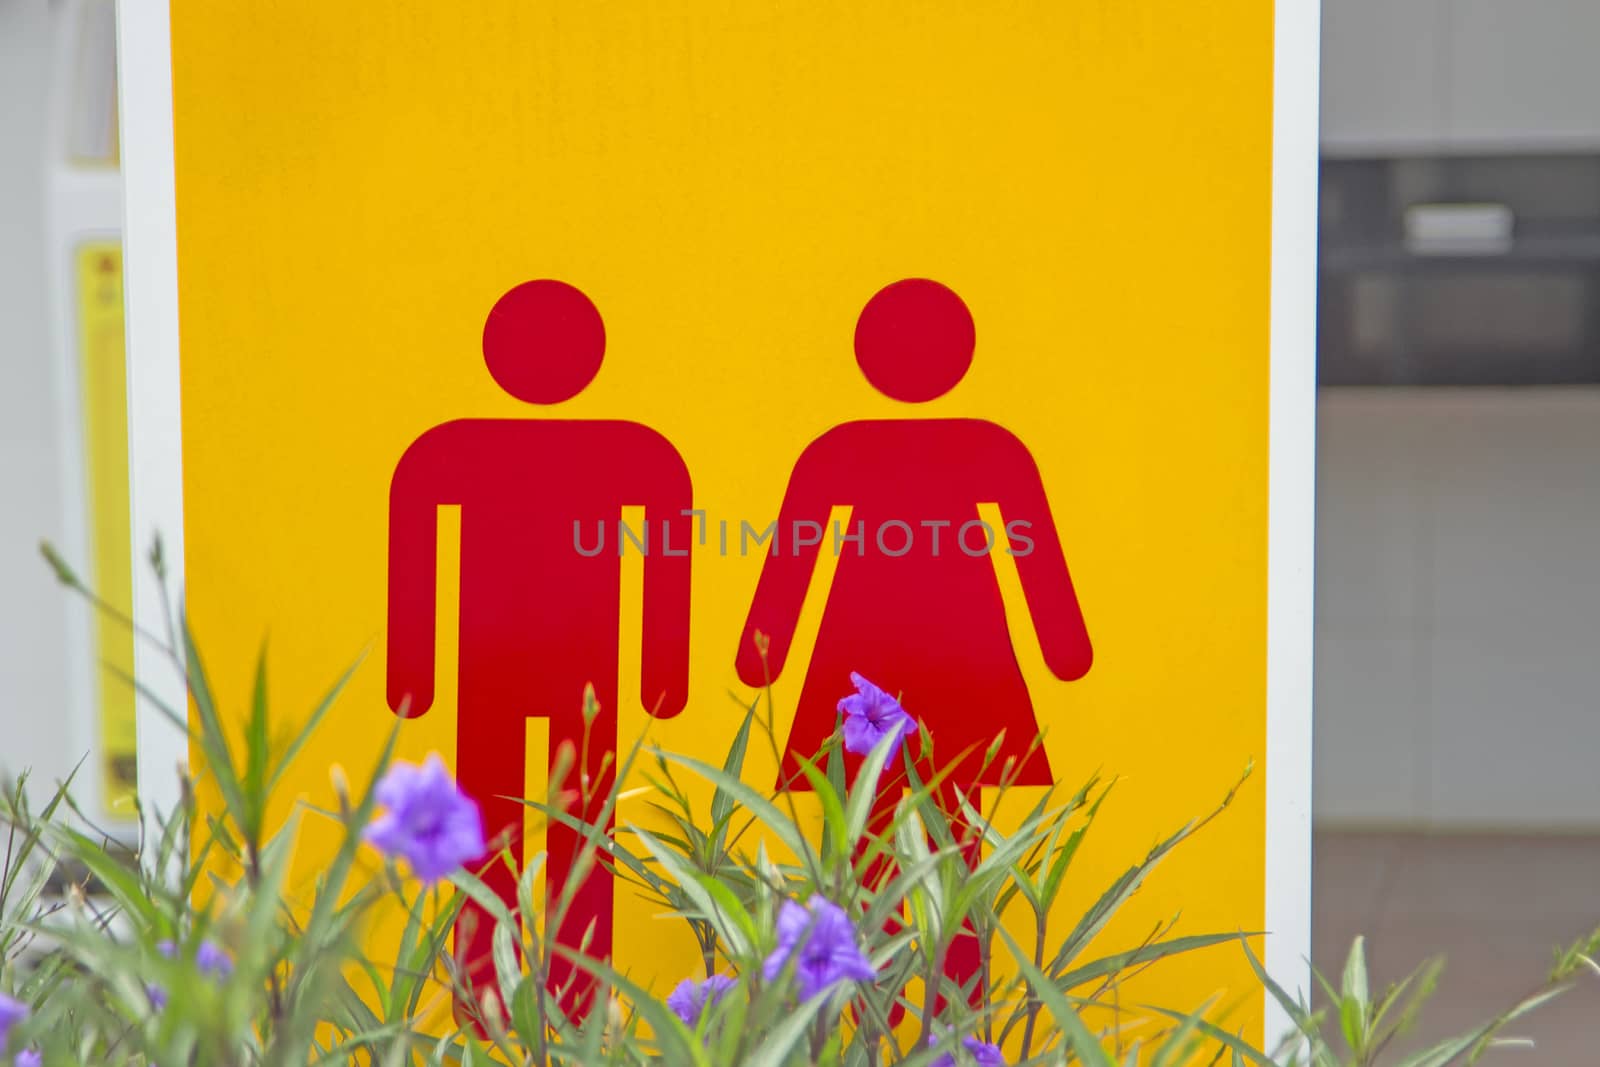 Male red-female toilet symbol, yellow background with purple flowers